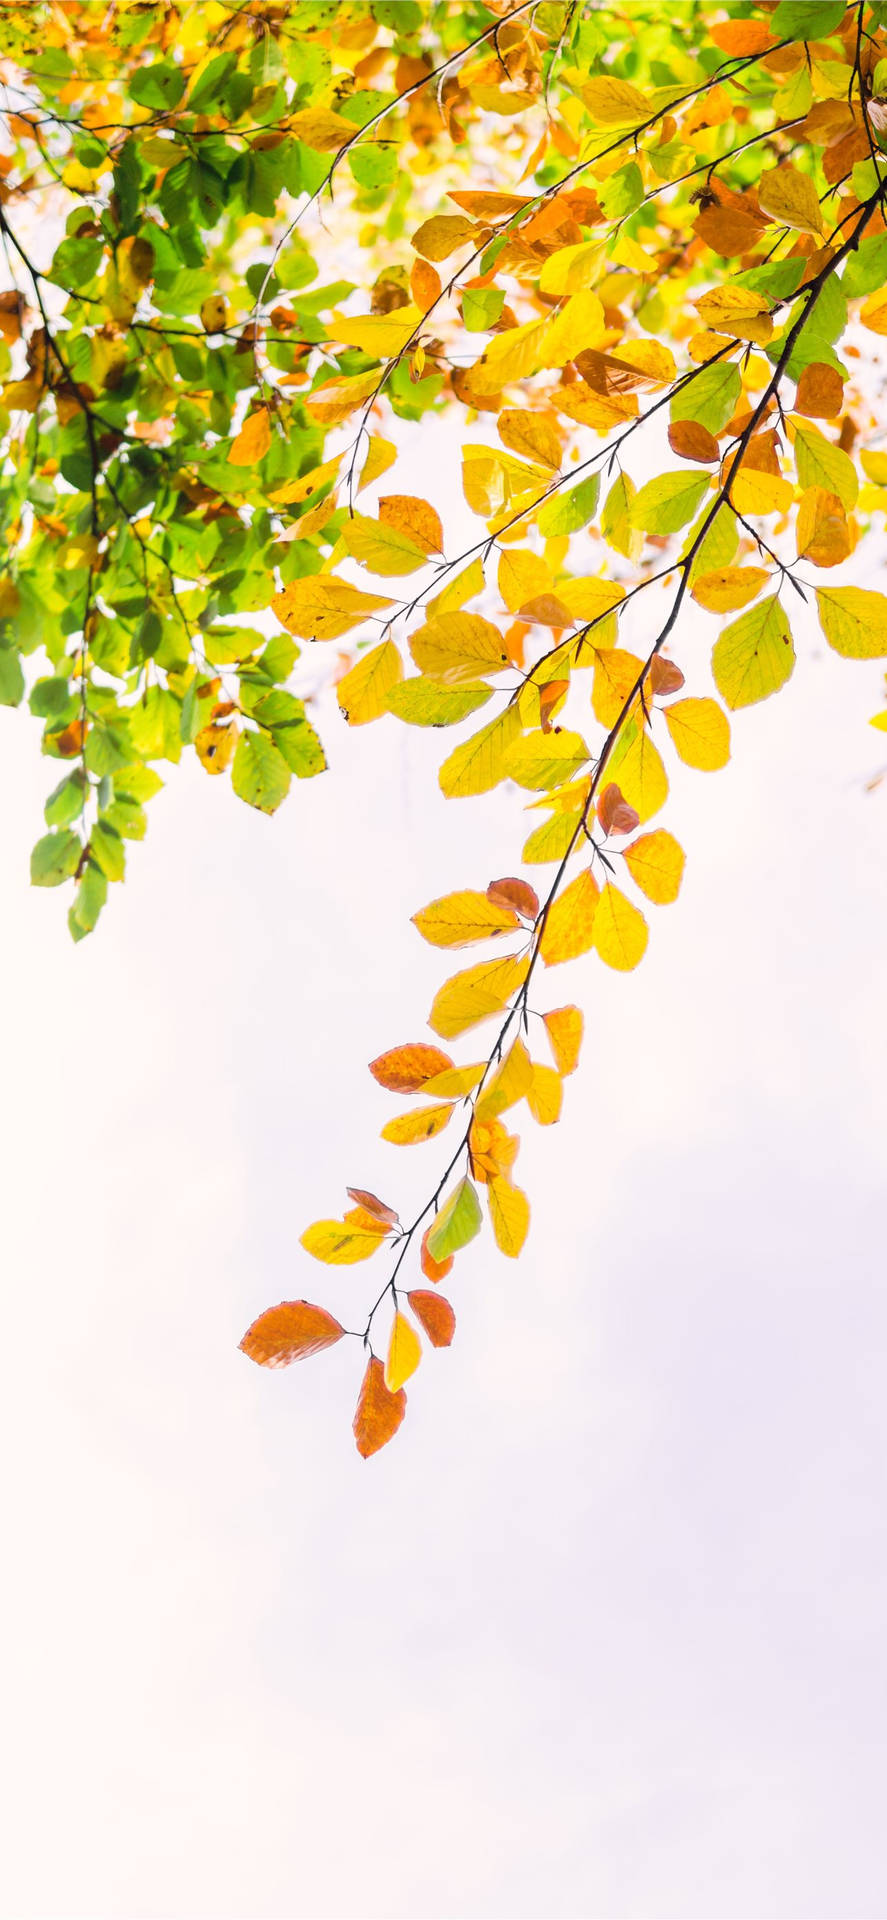 Autumn Iphone Yellow And Green Foliage Wallpaper